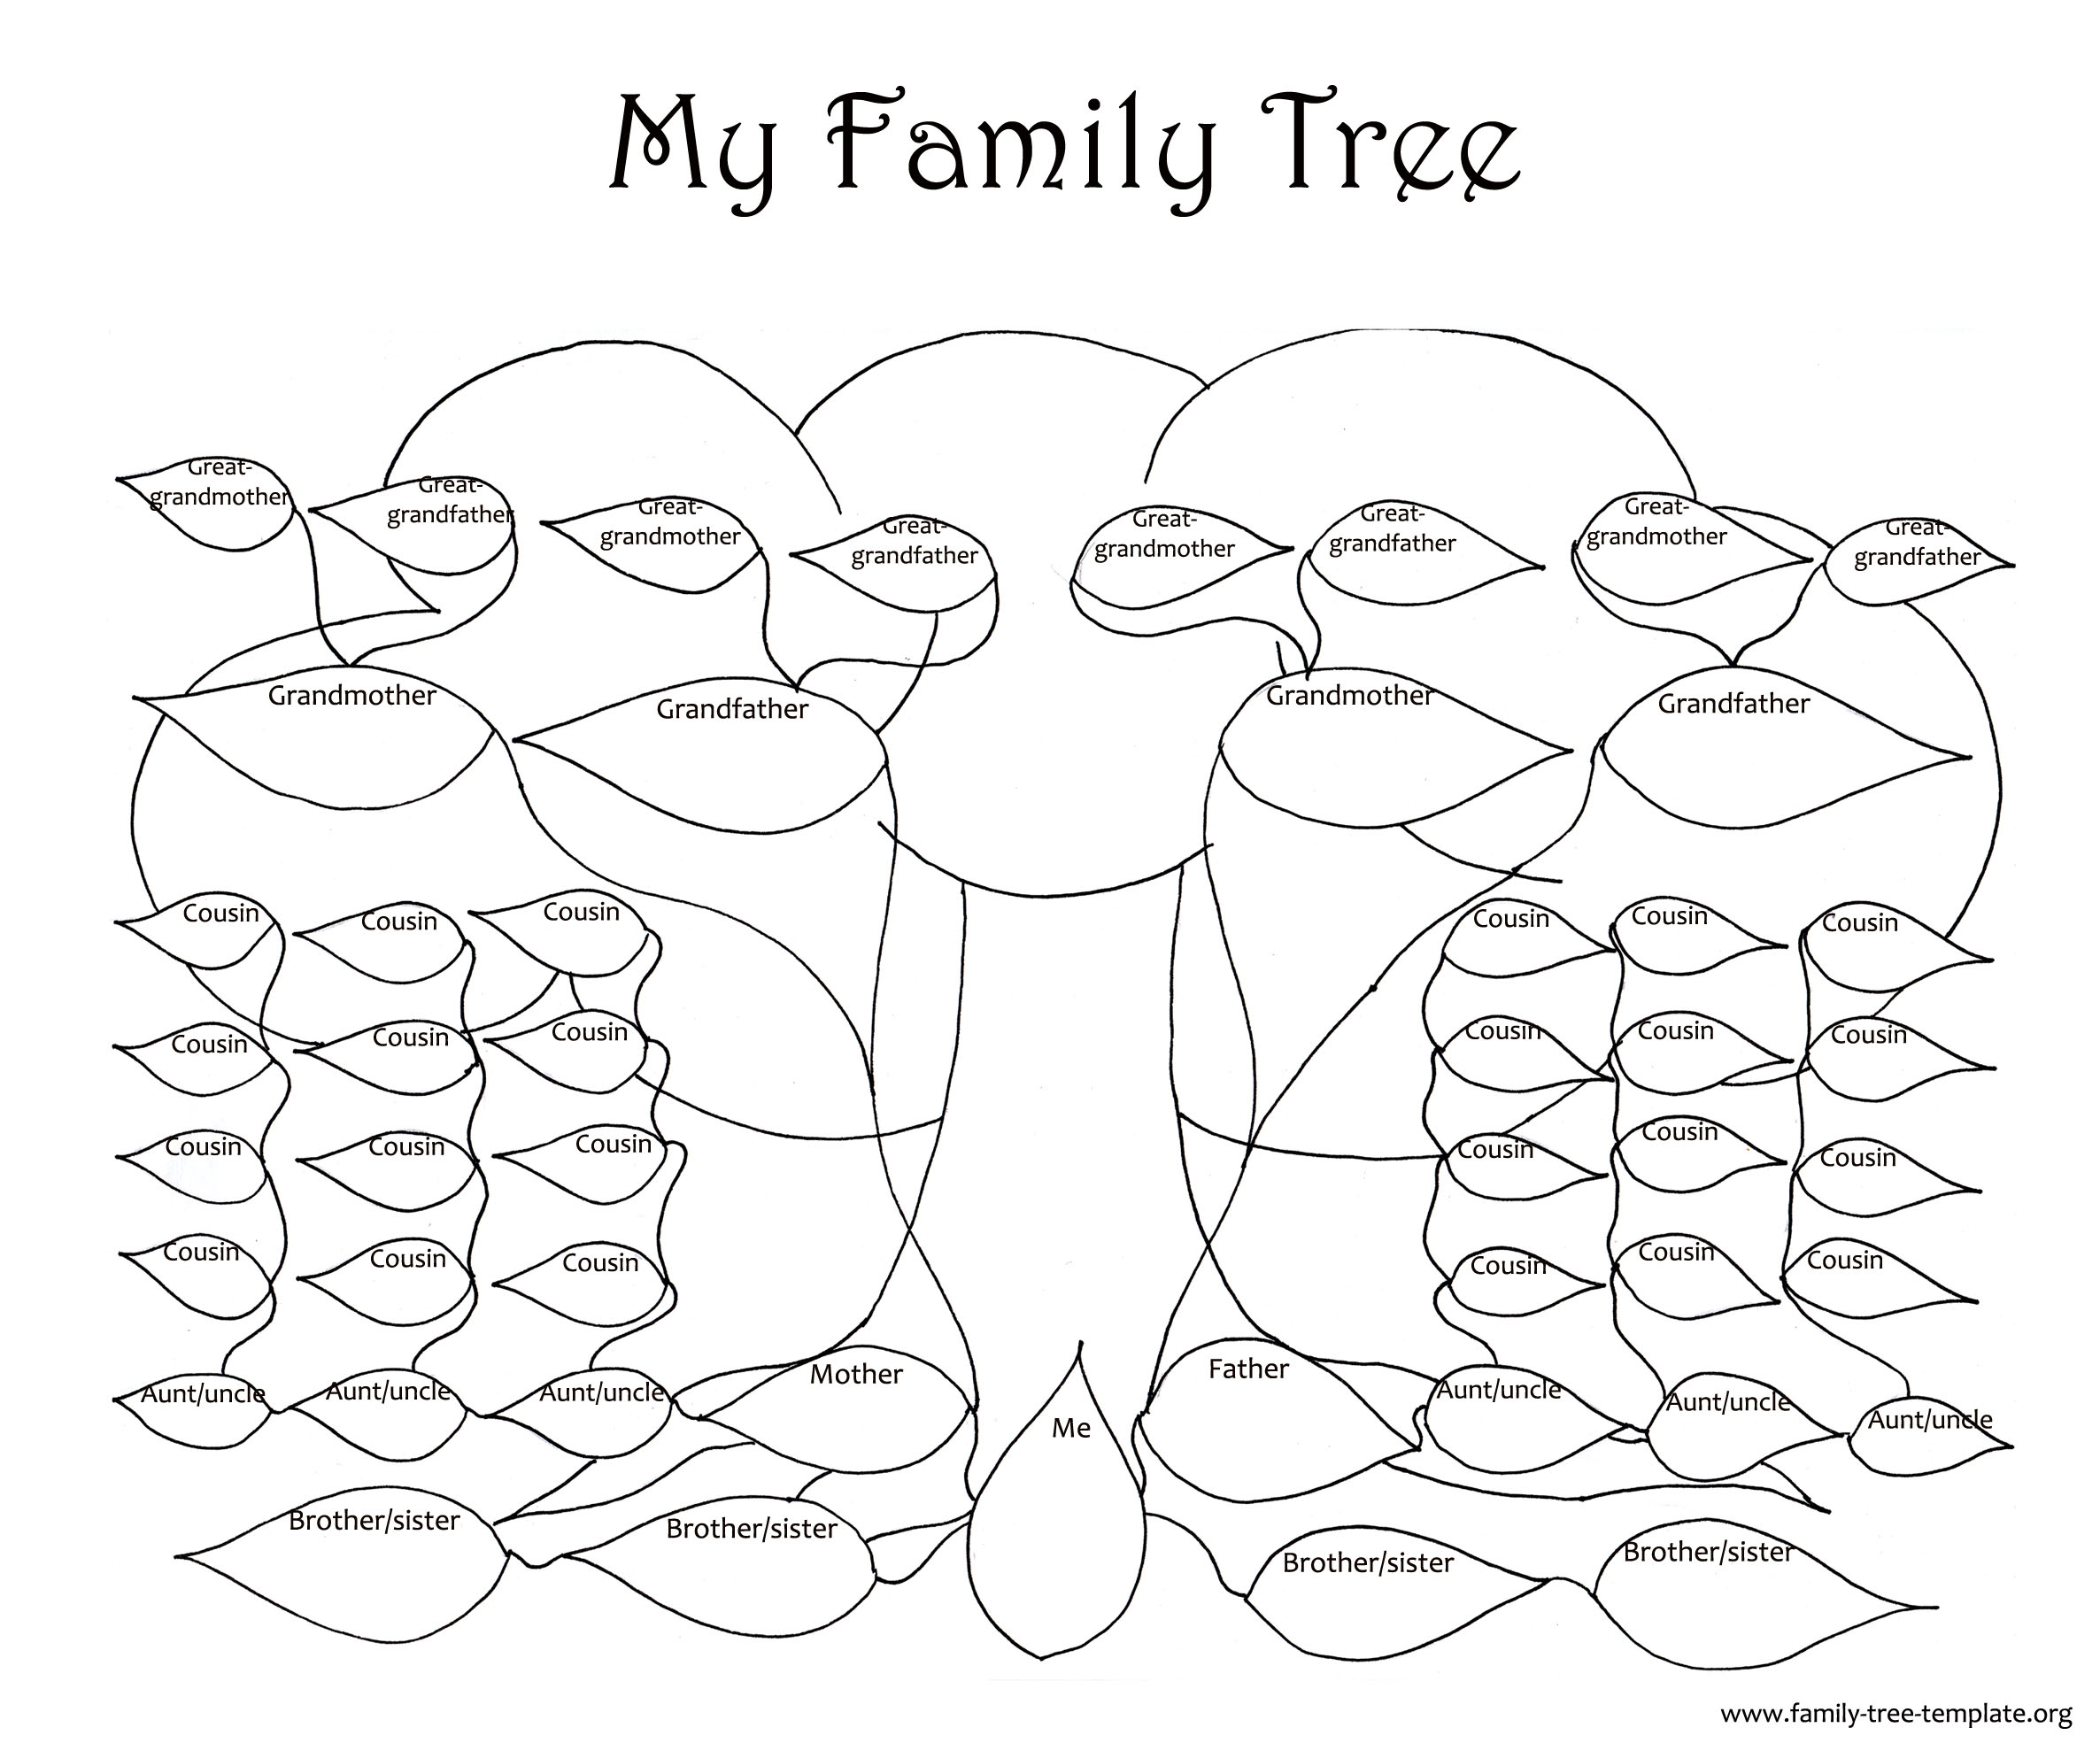 Family tree template for kids to fill out and color